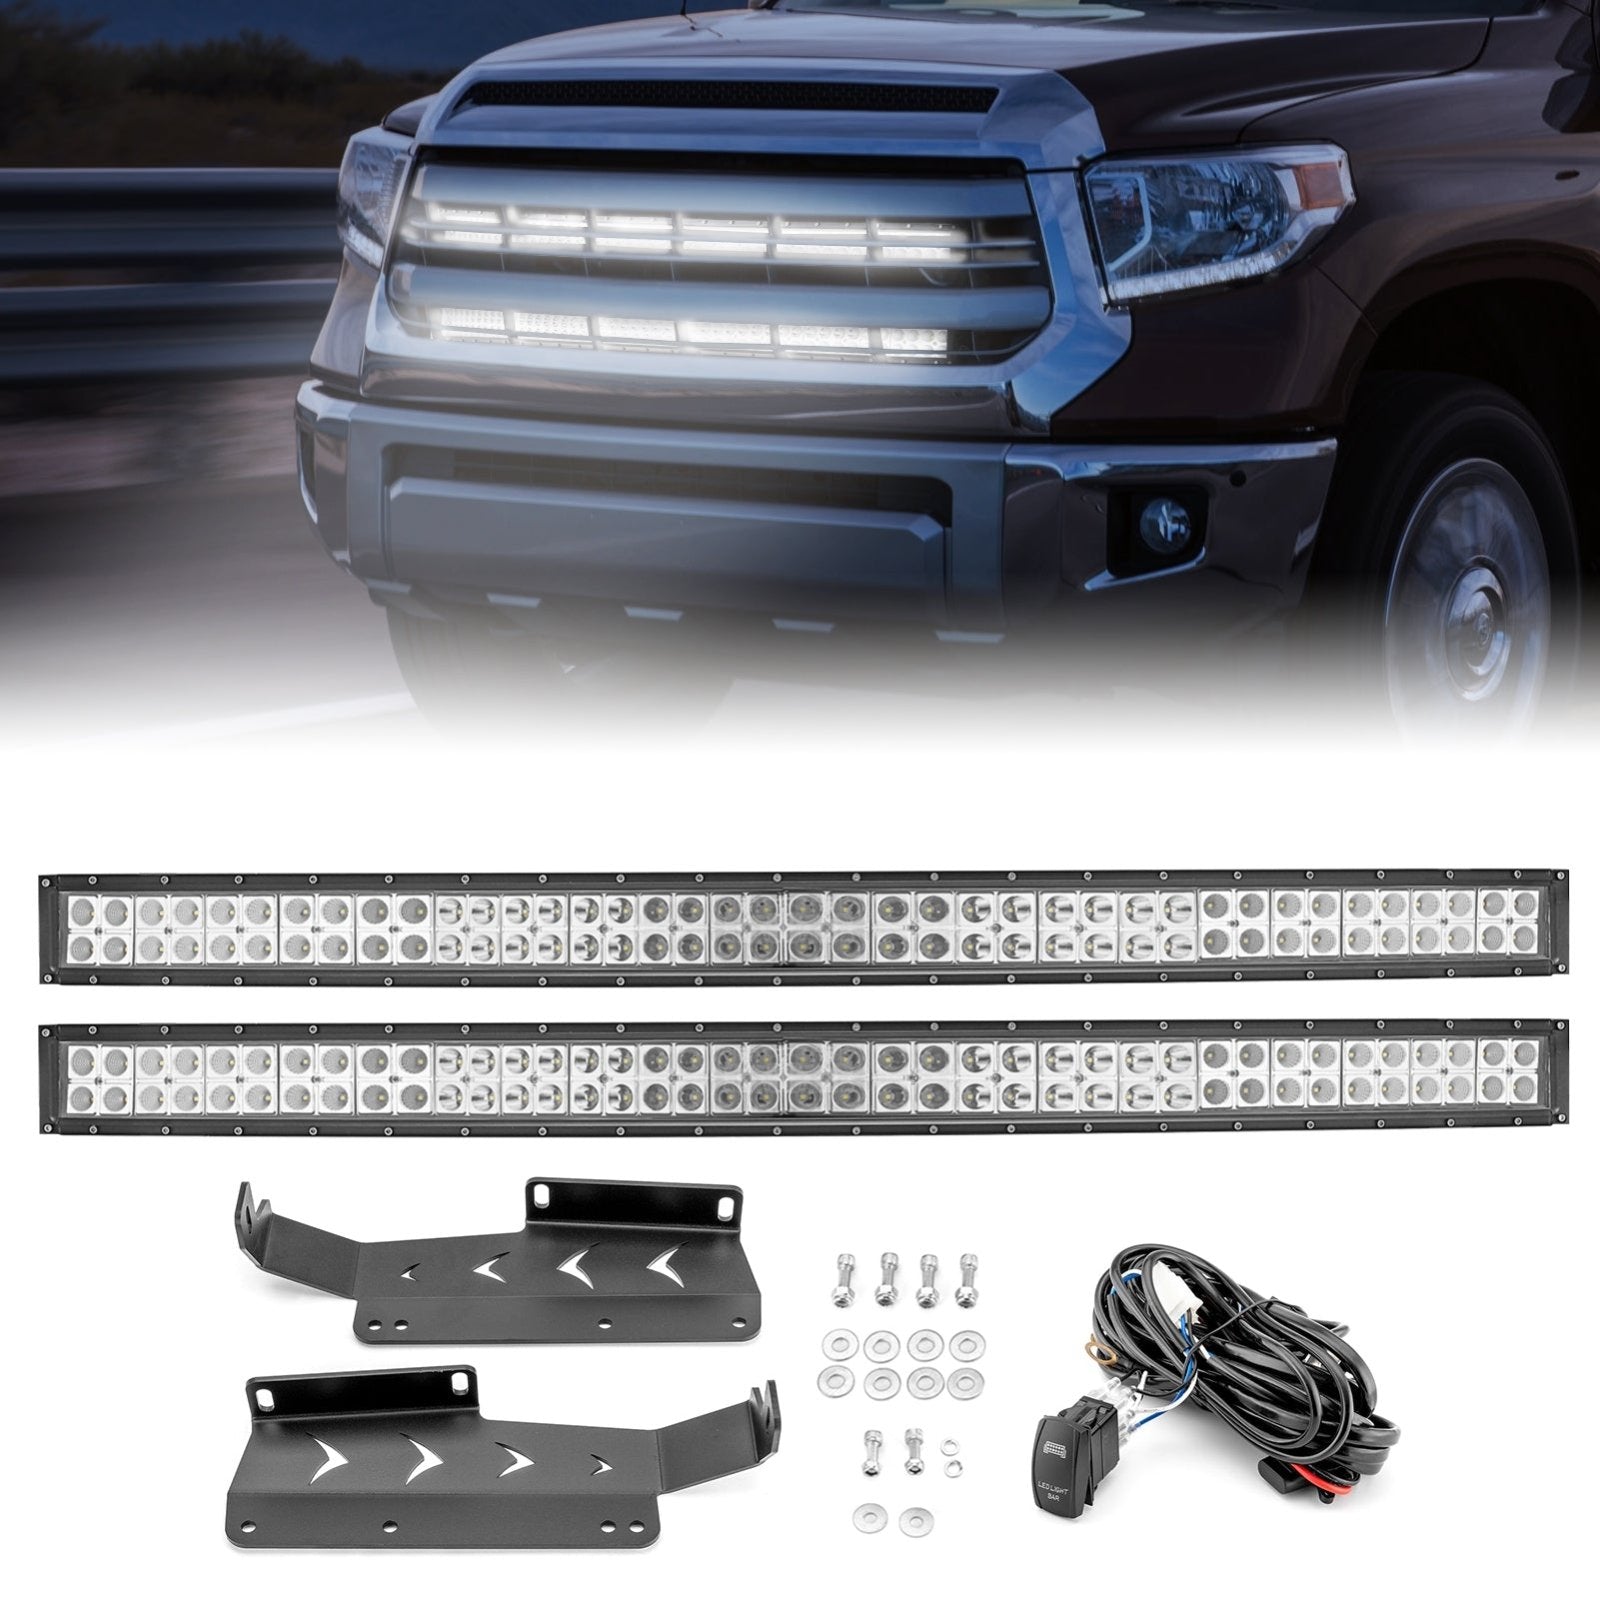 2014-2021 Toyota Tundra Upper Grille Dual 42" Curved LED Light Bar Kit - Weisen